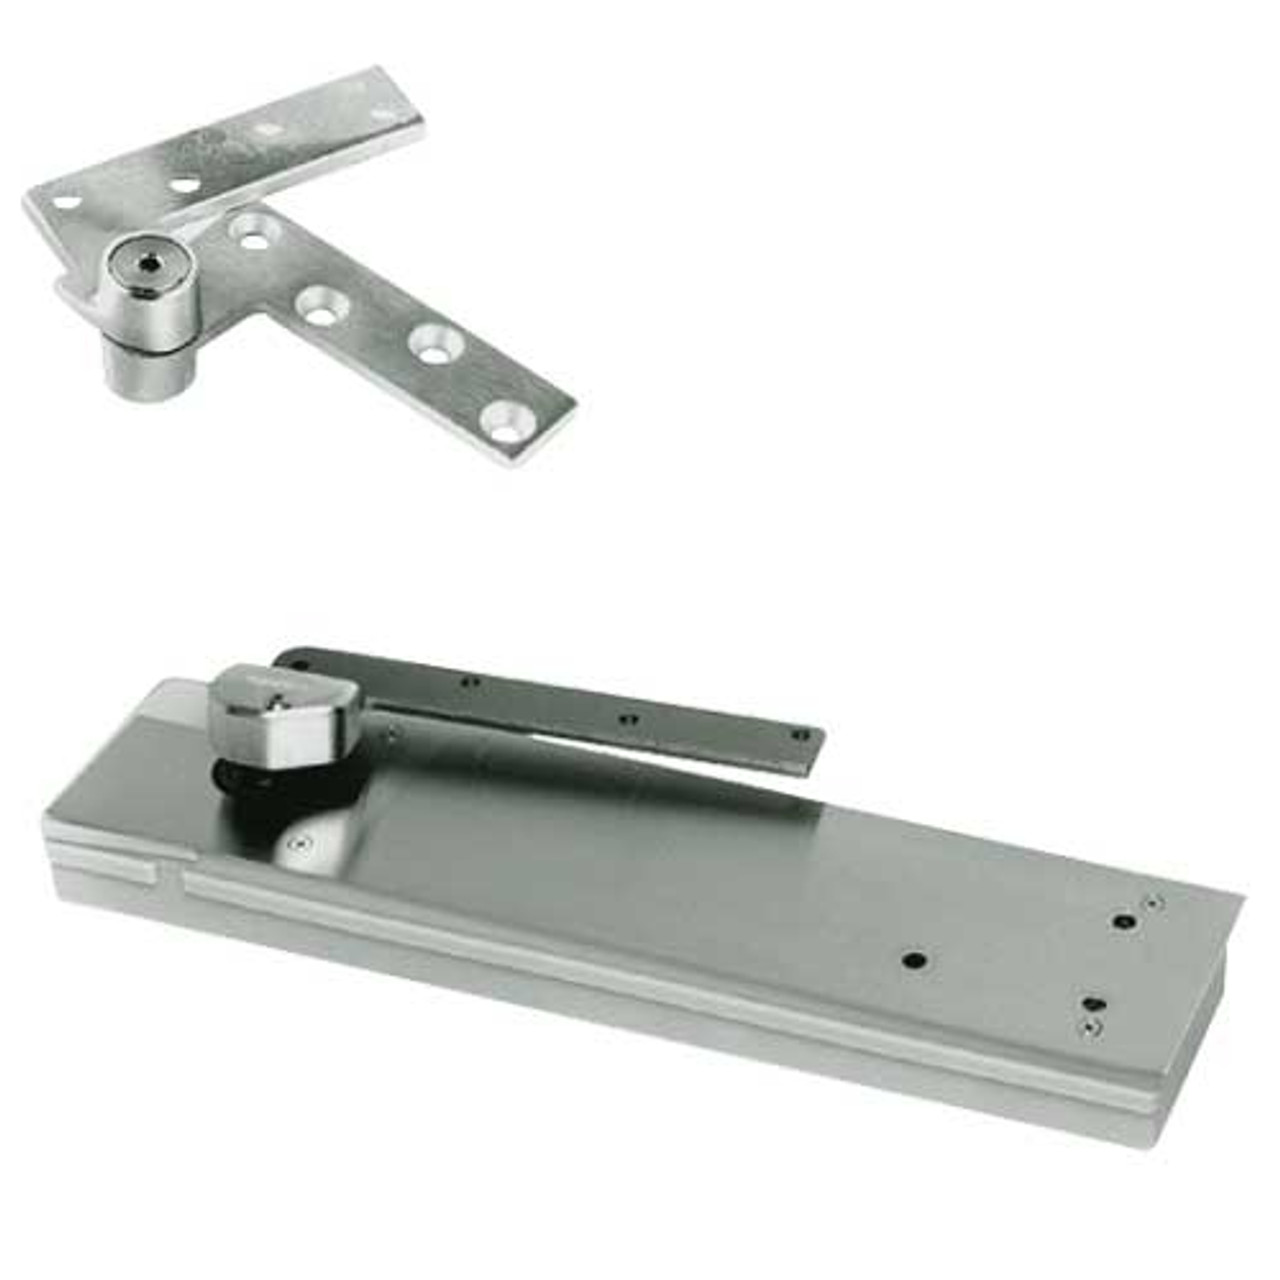 5103ABC105-1-1/2OS-LCC-LH-619 Rixson 51 Series 1-1/2" Offset Hung Shallow Depth Floor Closers in Satin Nickel Finish